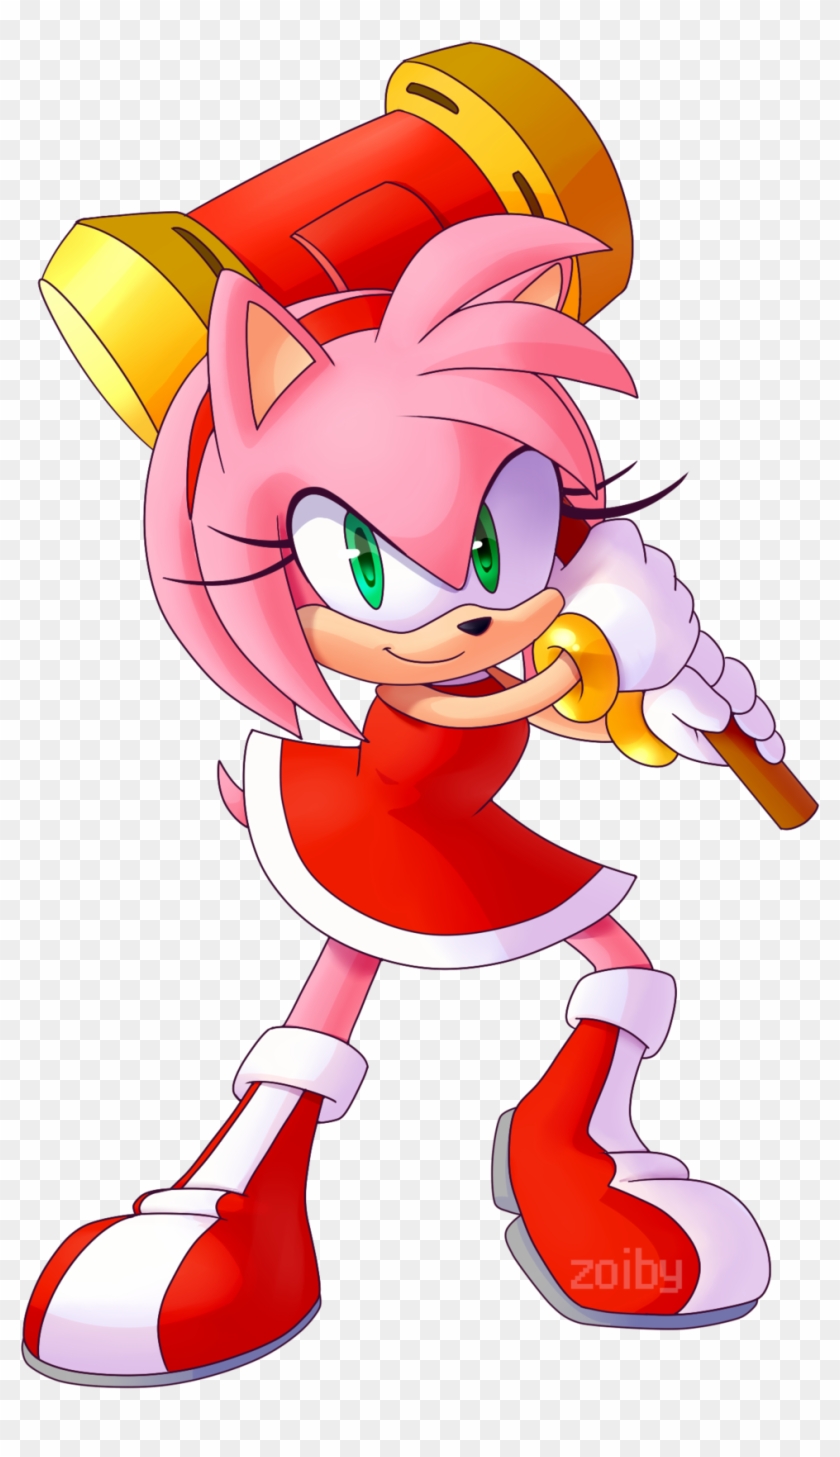 Amy Rose By Zoiby - Amy Rose #352580